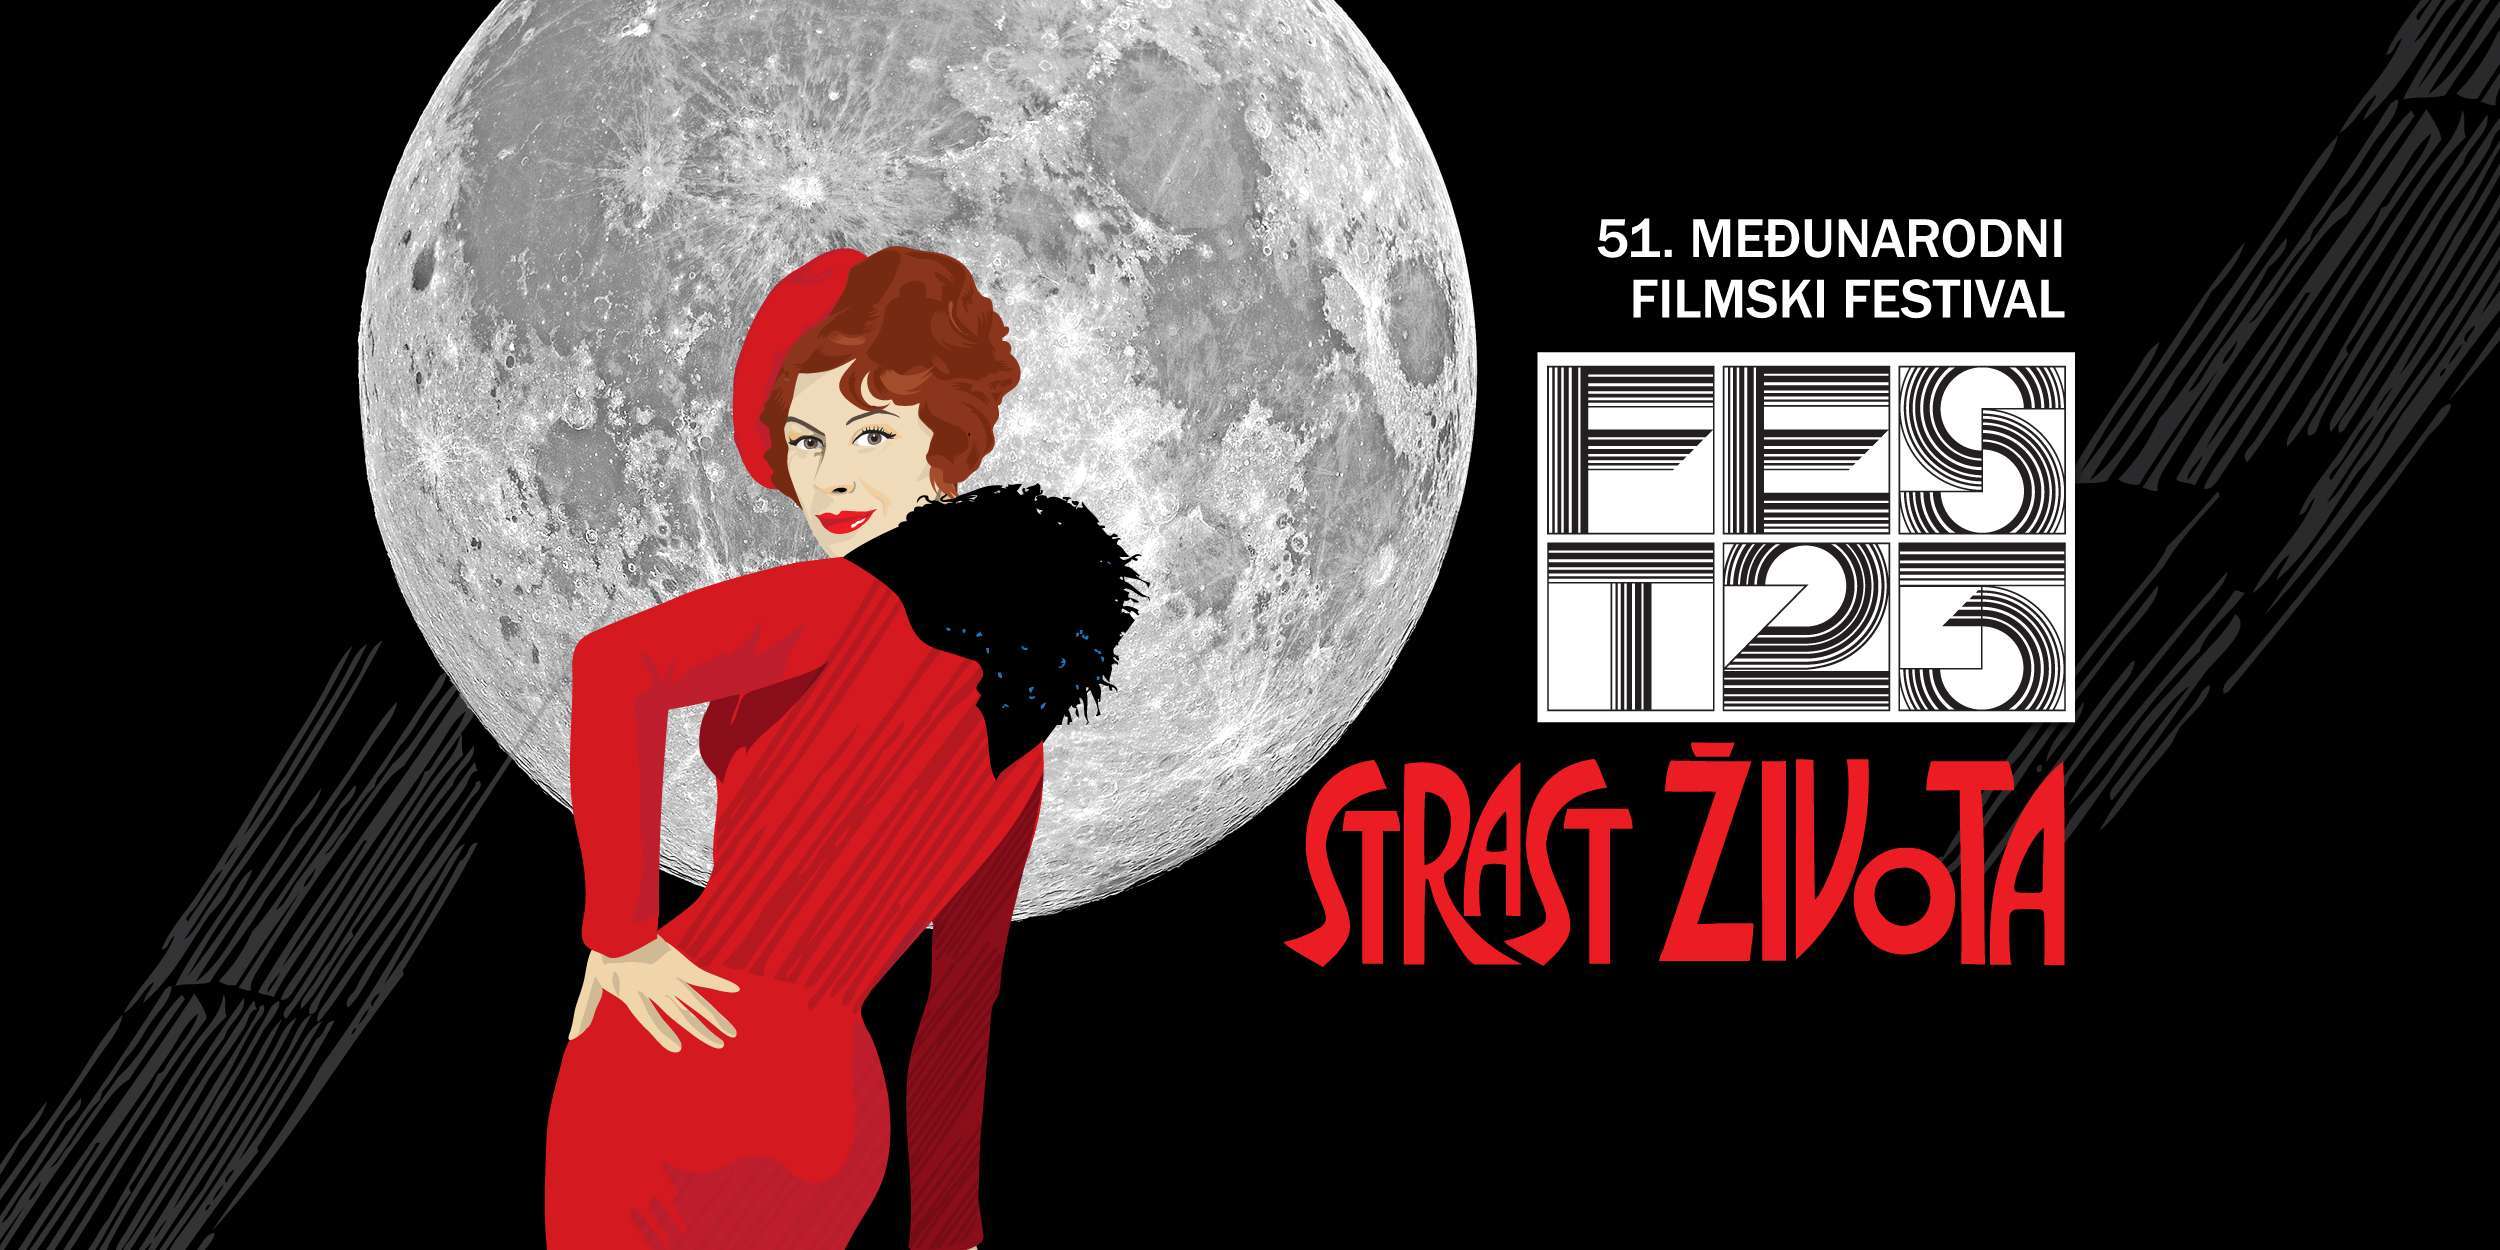 51st FEST – from February 24 to March 5, 2023